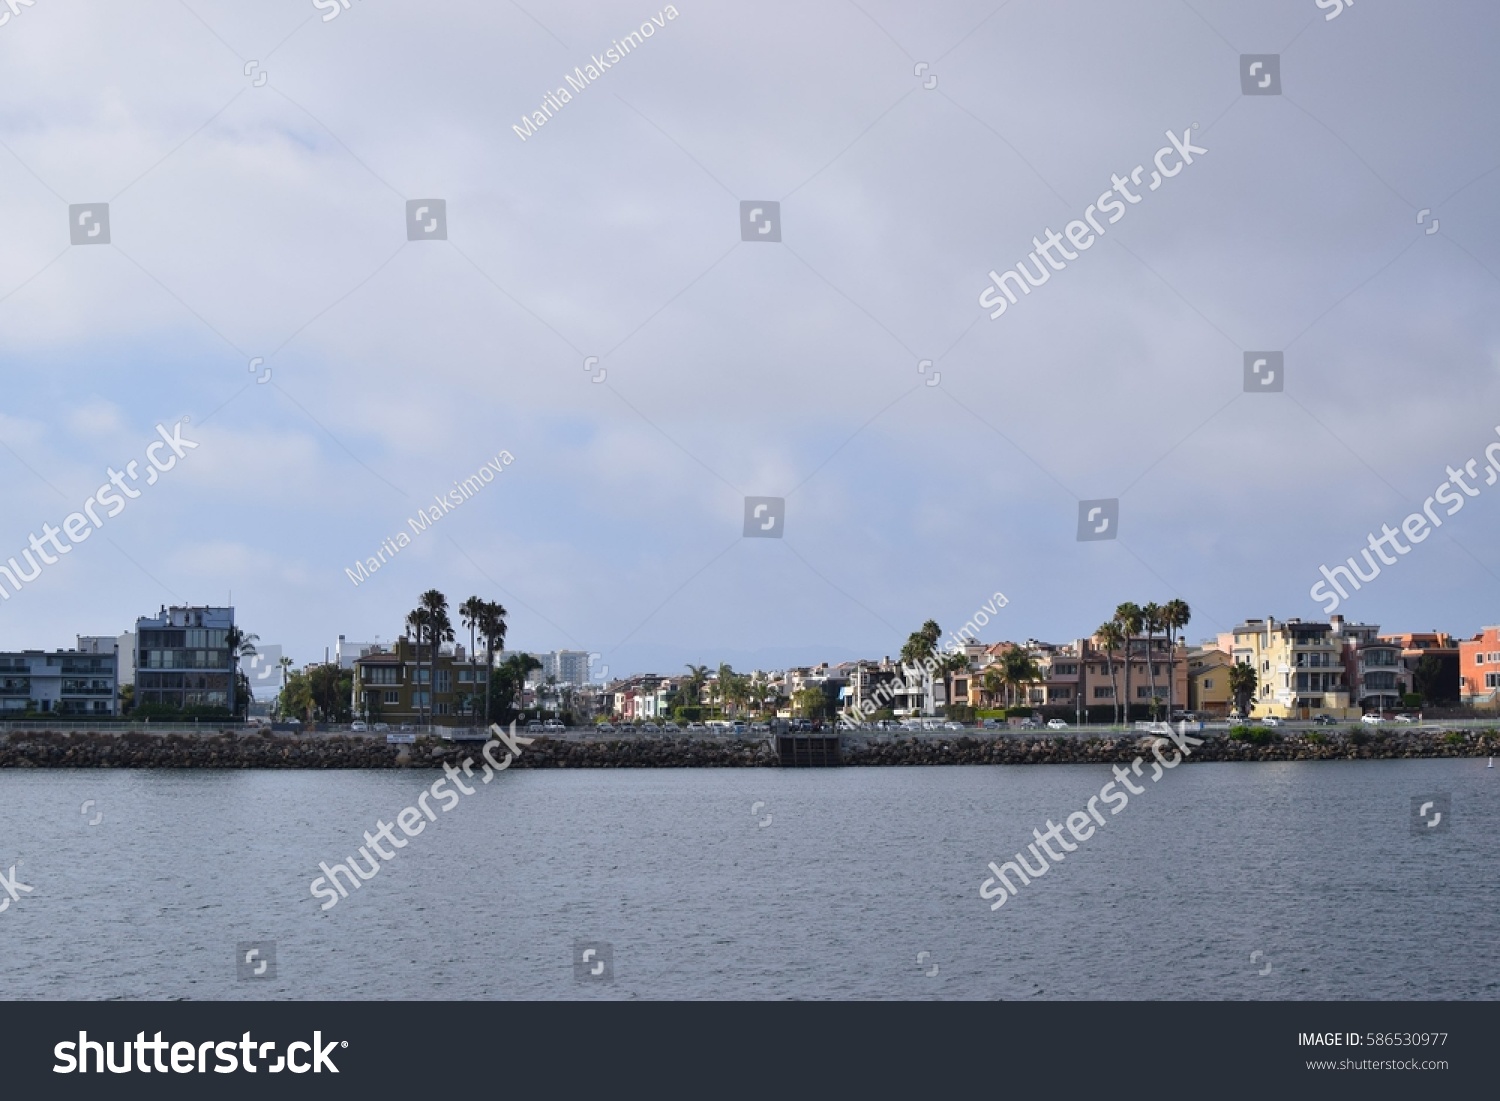 Sunny and cloudy day, houses and palm trees in bay area, California  #586530977